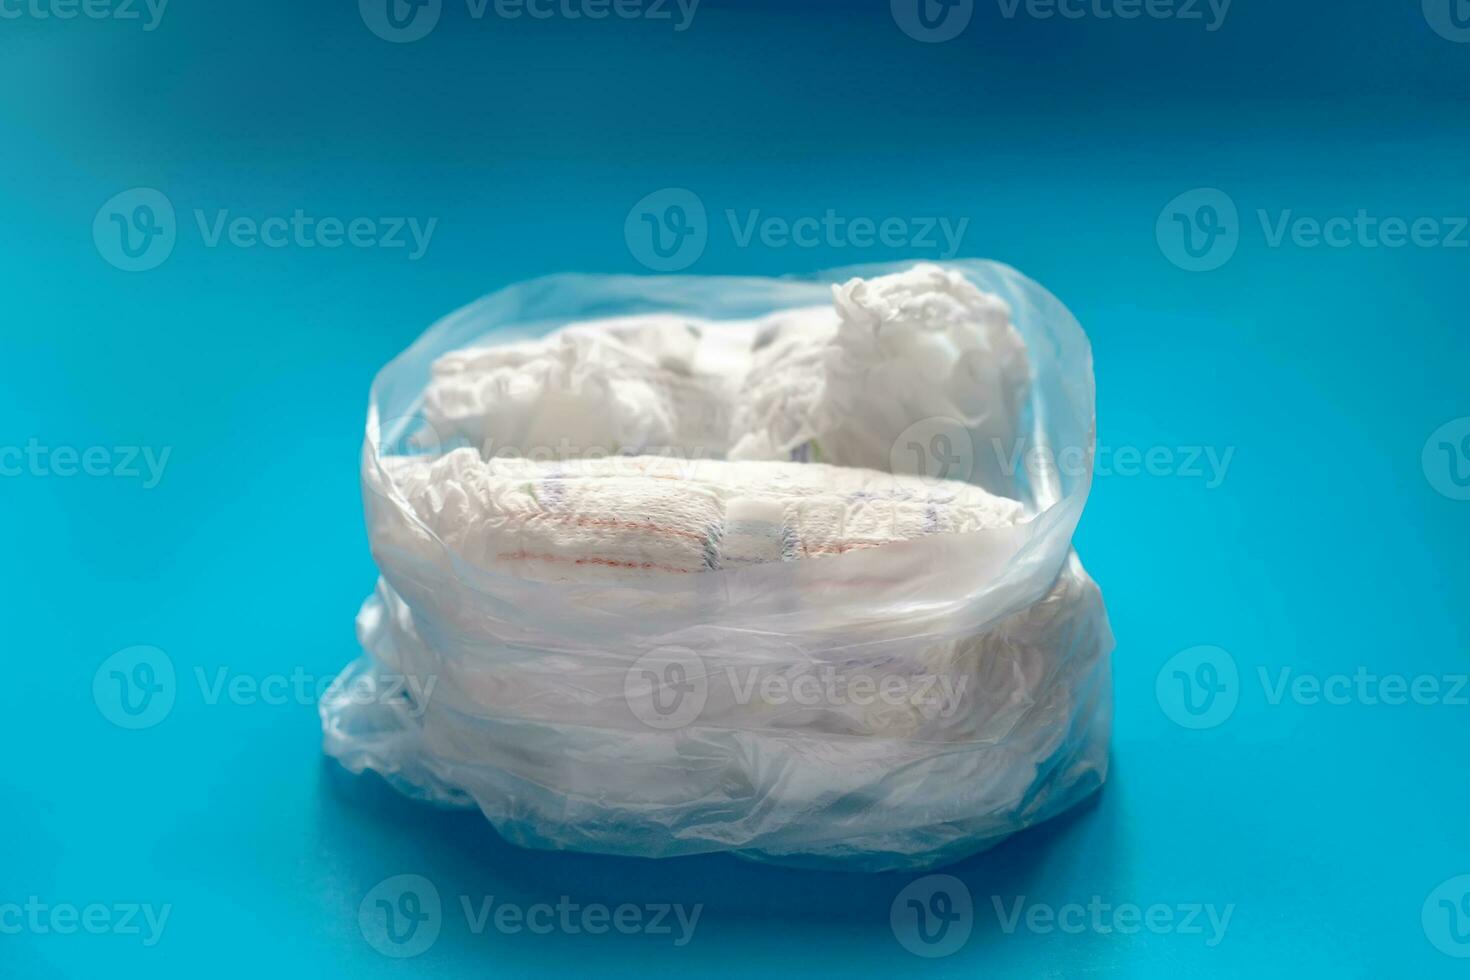 Polyetteline transparent bag with used diapers on blue background. Unprocessed waste. Deficit of diapers during coronavirus quarantine. photo